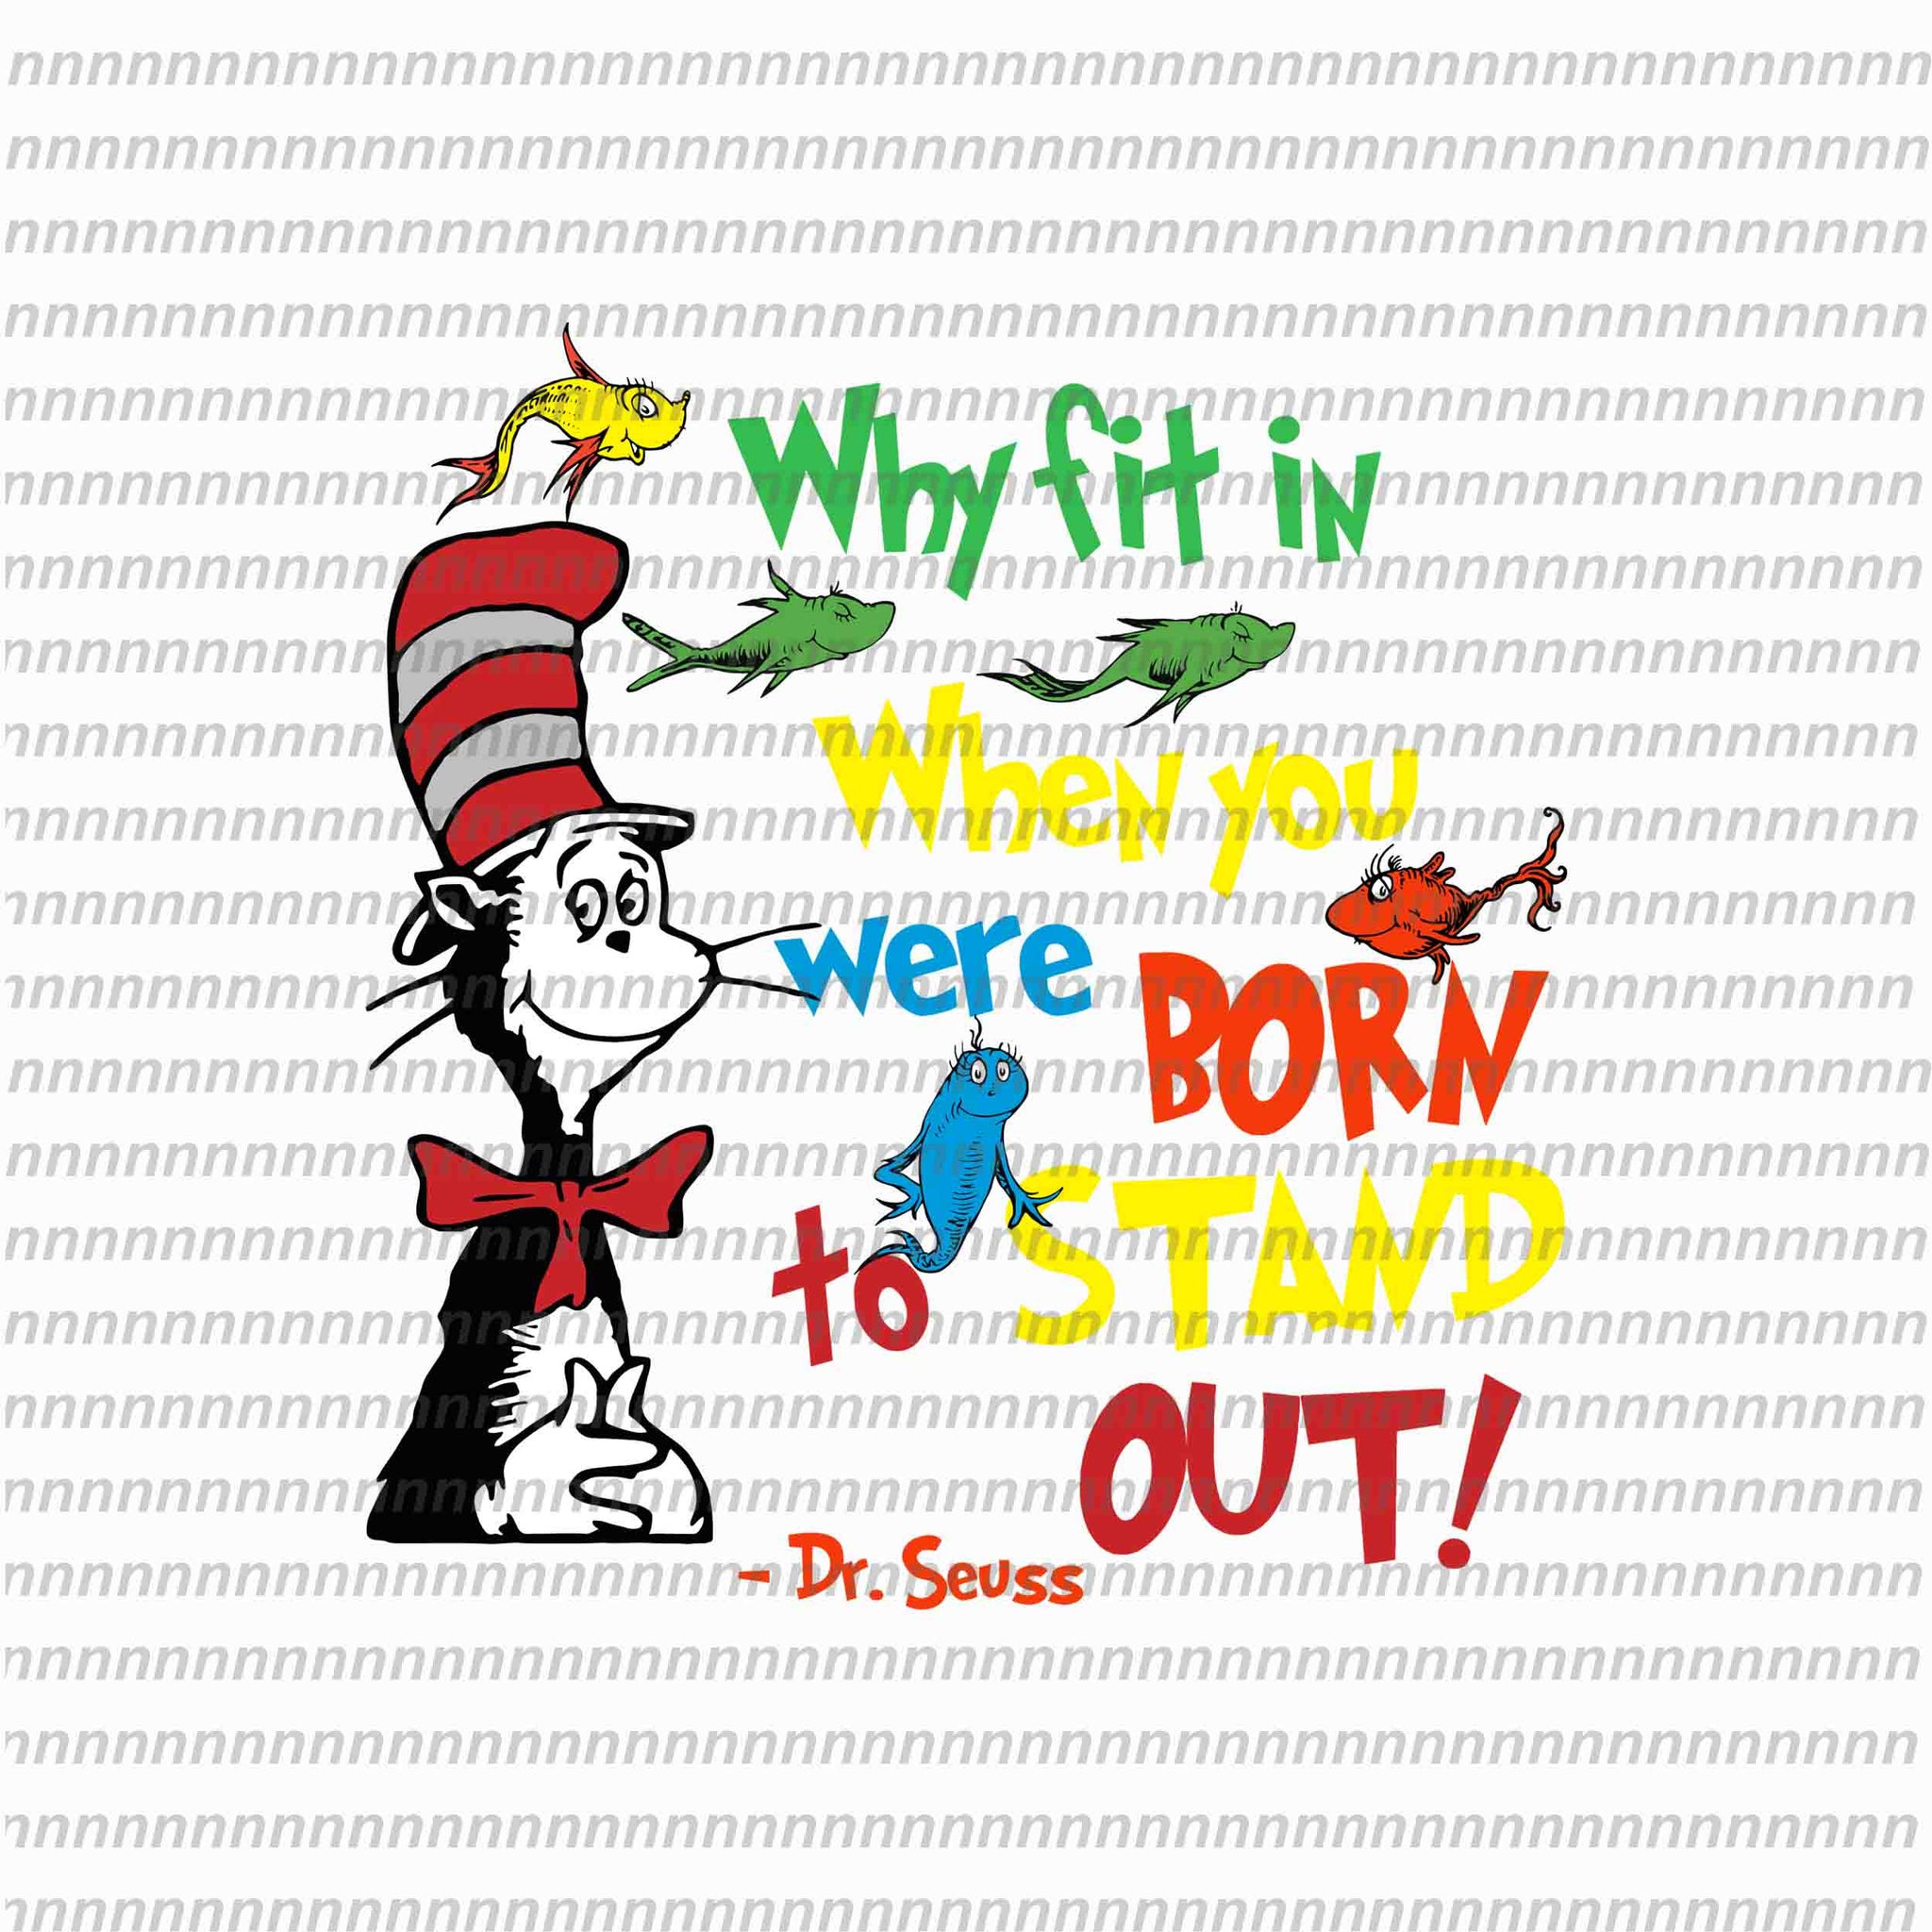 Why fin in when you were born to stand out, dr seuss svg,dr seuss vector, dr seuss quote, dr seuss design, Cat in the hat svg, thing 1 thing 2 thing 3, svg, png, dxf, eps file